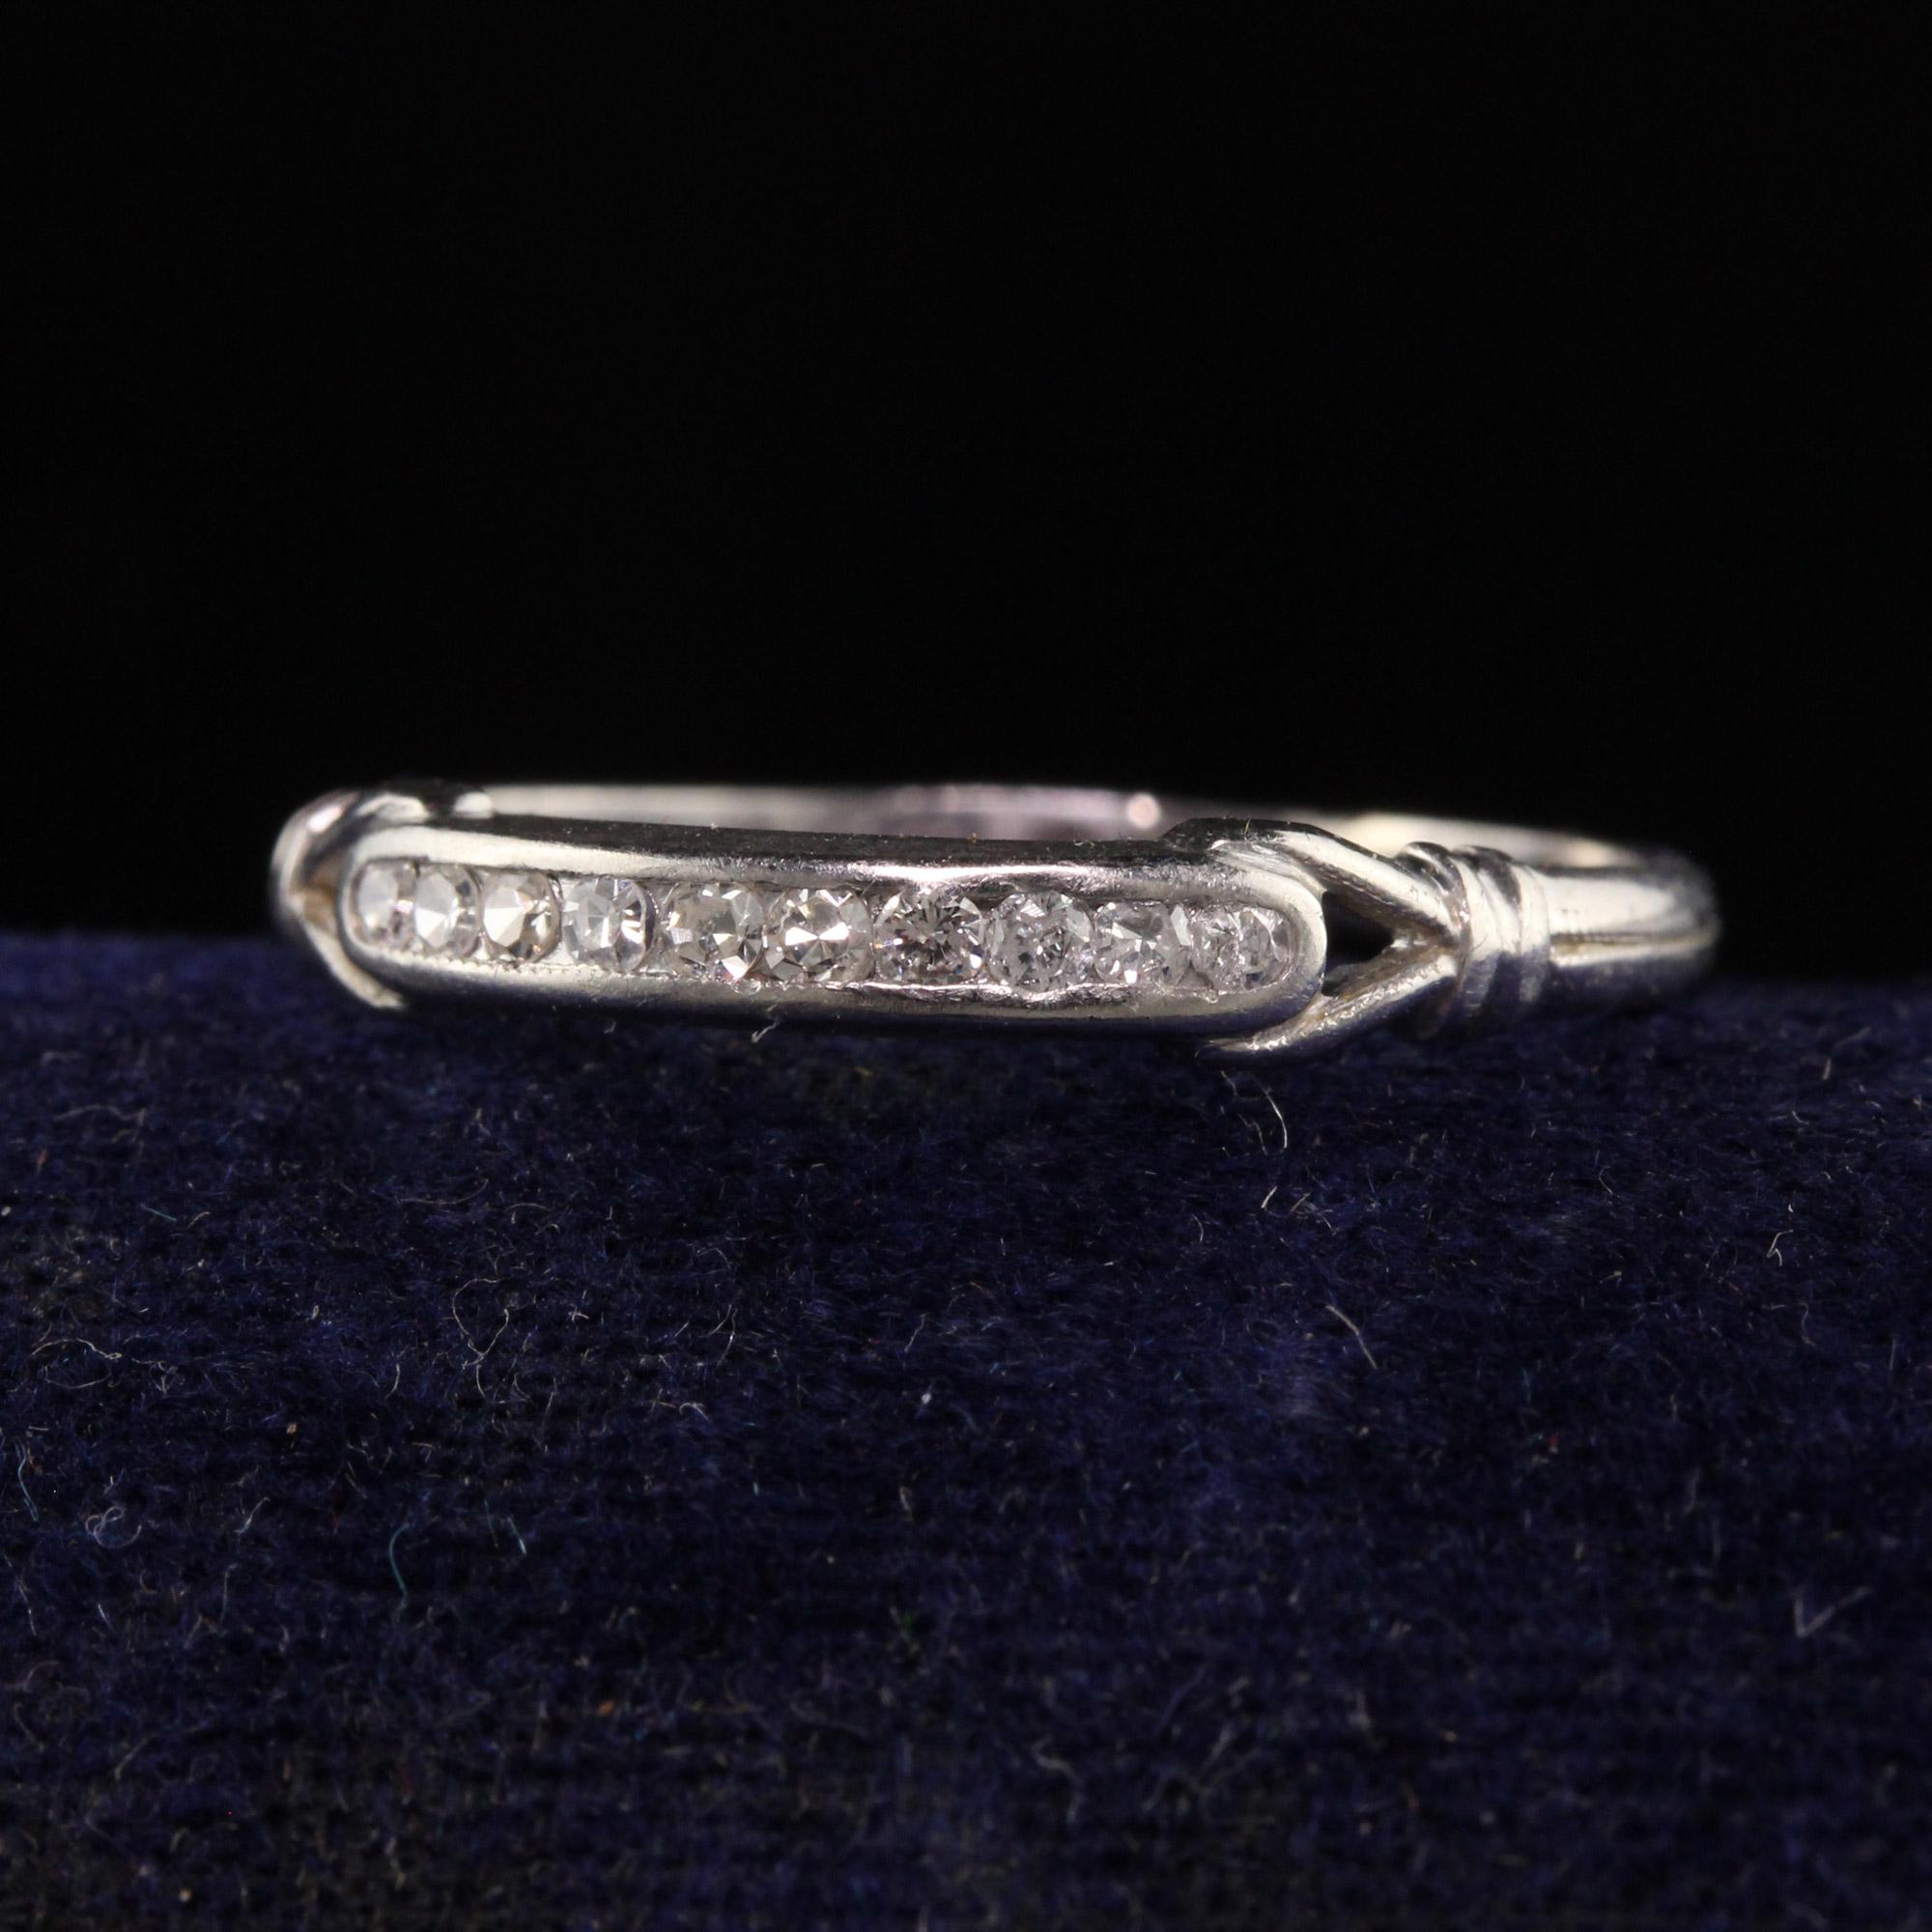 Beautiful Antique Art Deco Platinum Single Cut Diamond Engraved Wedding Band. This beautiful band is crafted in platinum and has single cut diamonds on the top of it. The inside of the band is engraved 